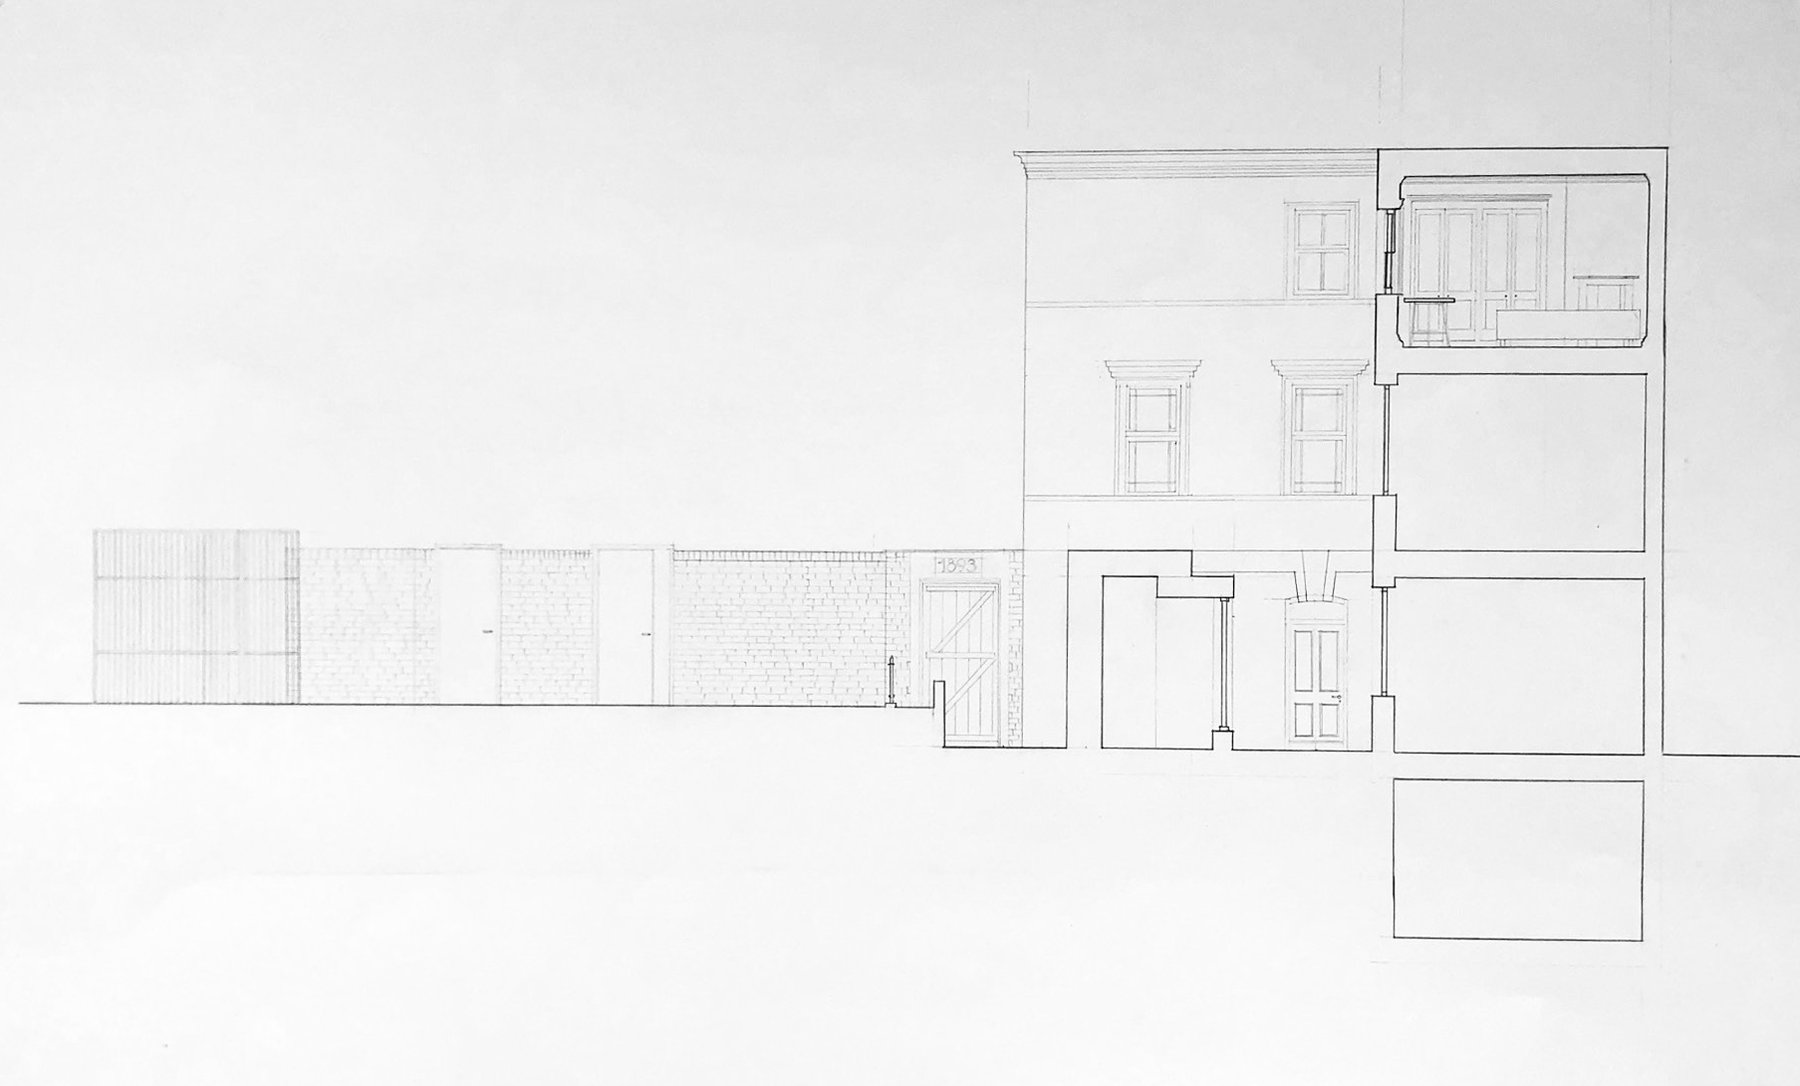 This is a section pencil drawing  through a building and the surrounding site. Particular care has been put into the thicknesses of the lines and precision in showing brickwork and architectural elements